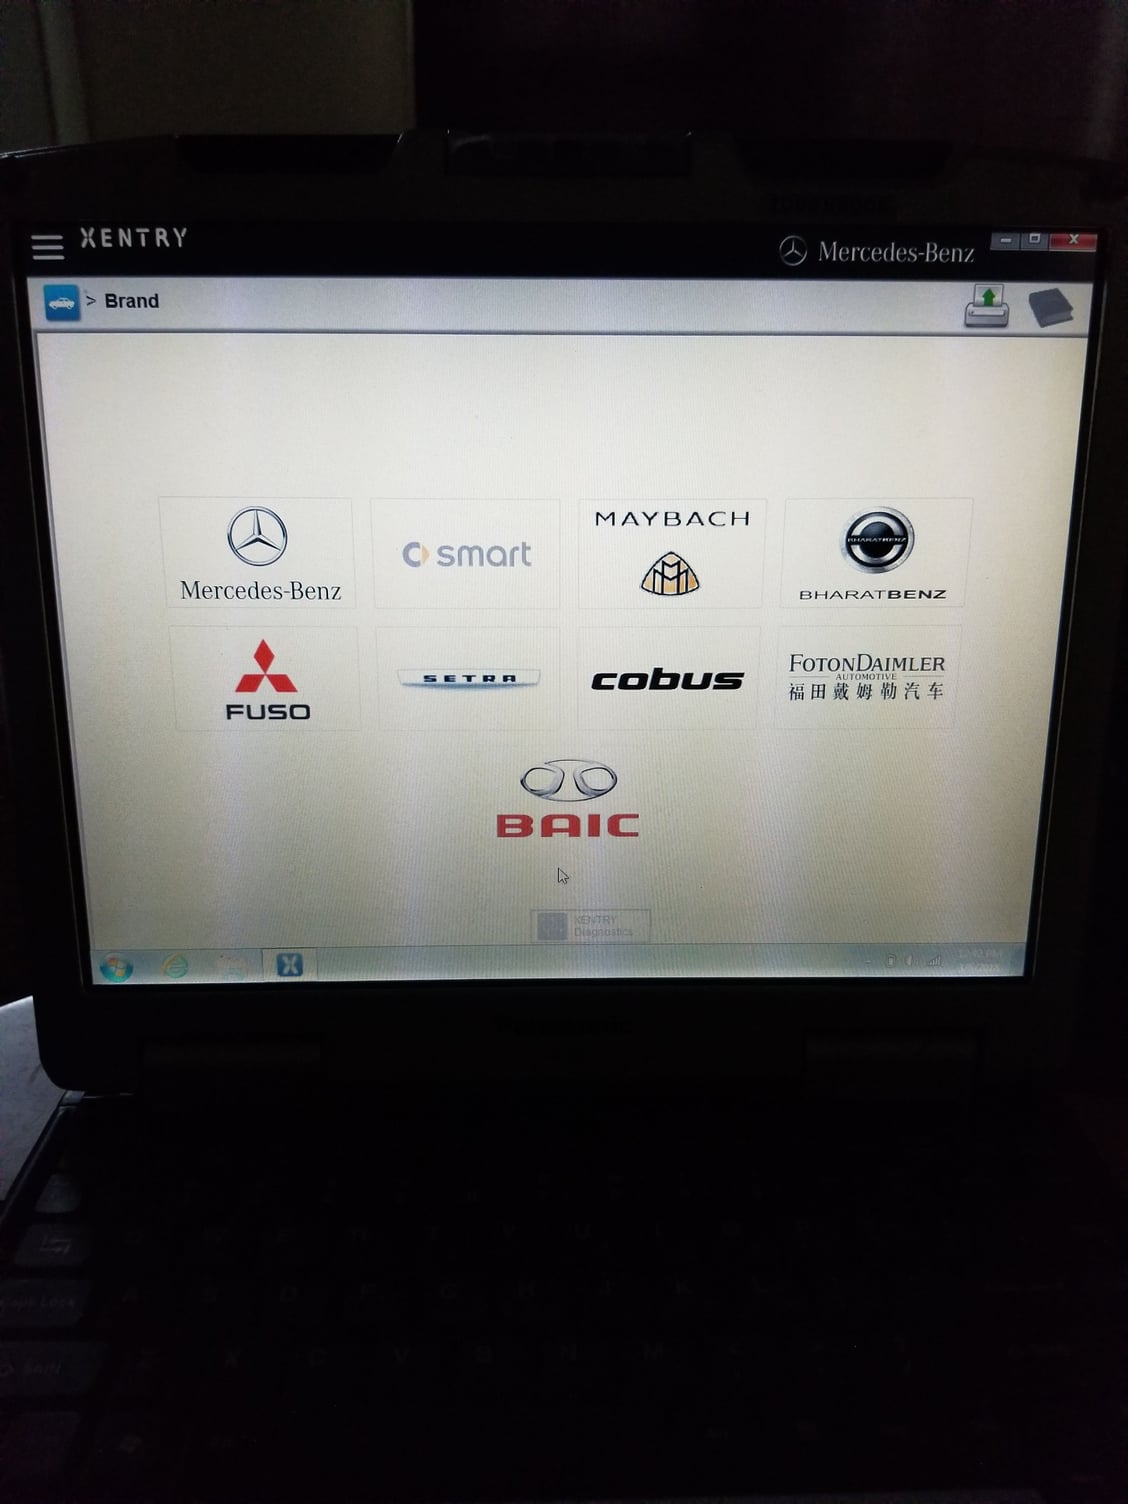 Miscellaneous - Star diagnostics - New - All Years Mercedes-Benz All Models - Nashville, TN 37209, United States